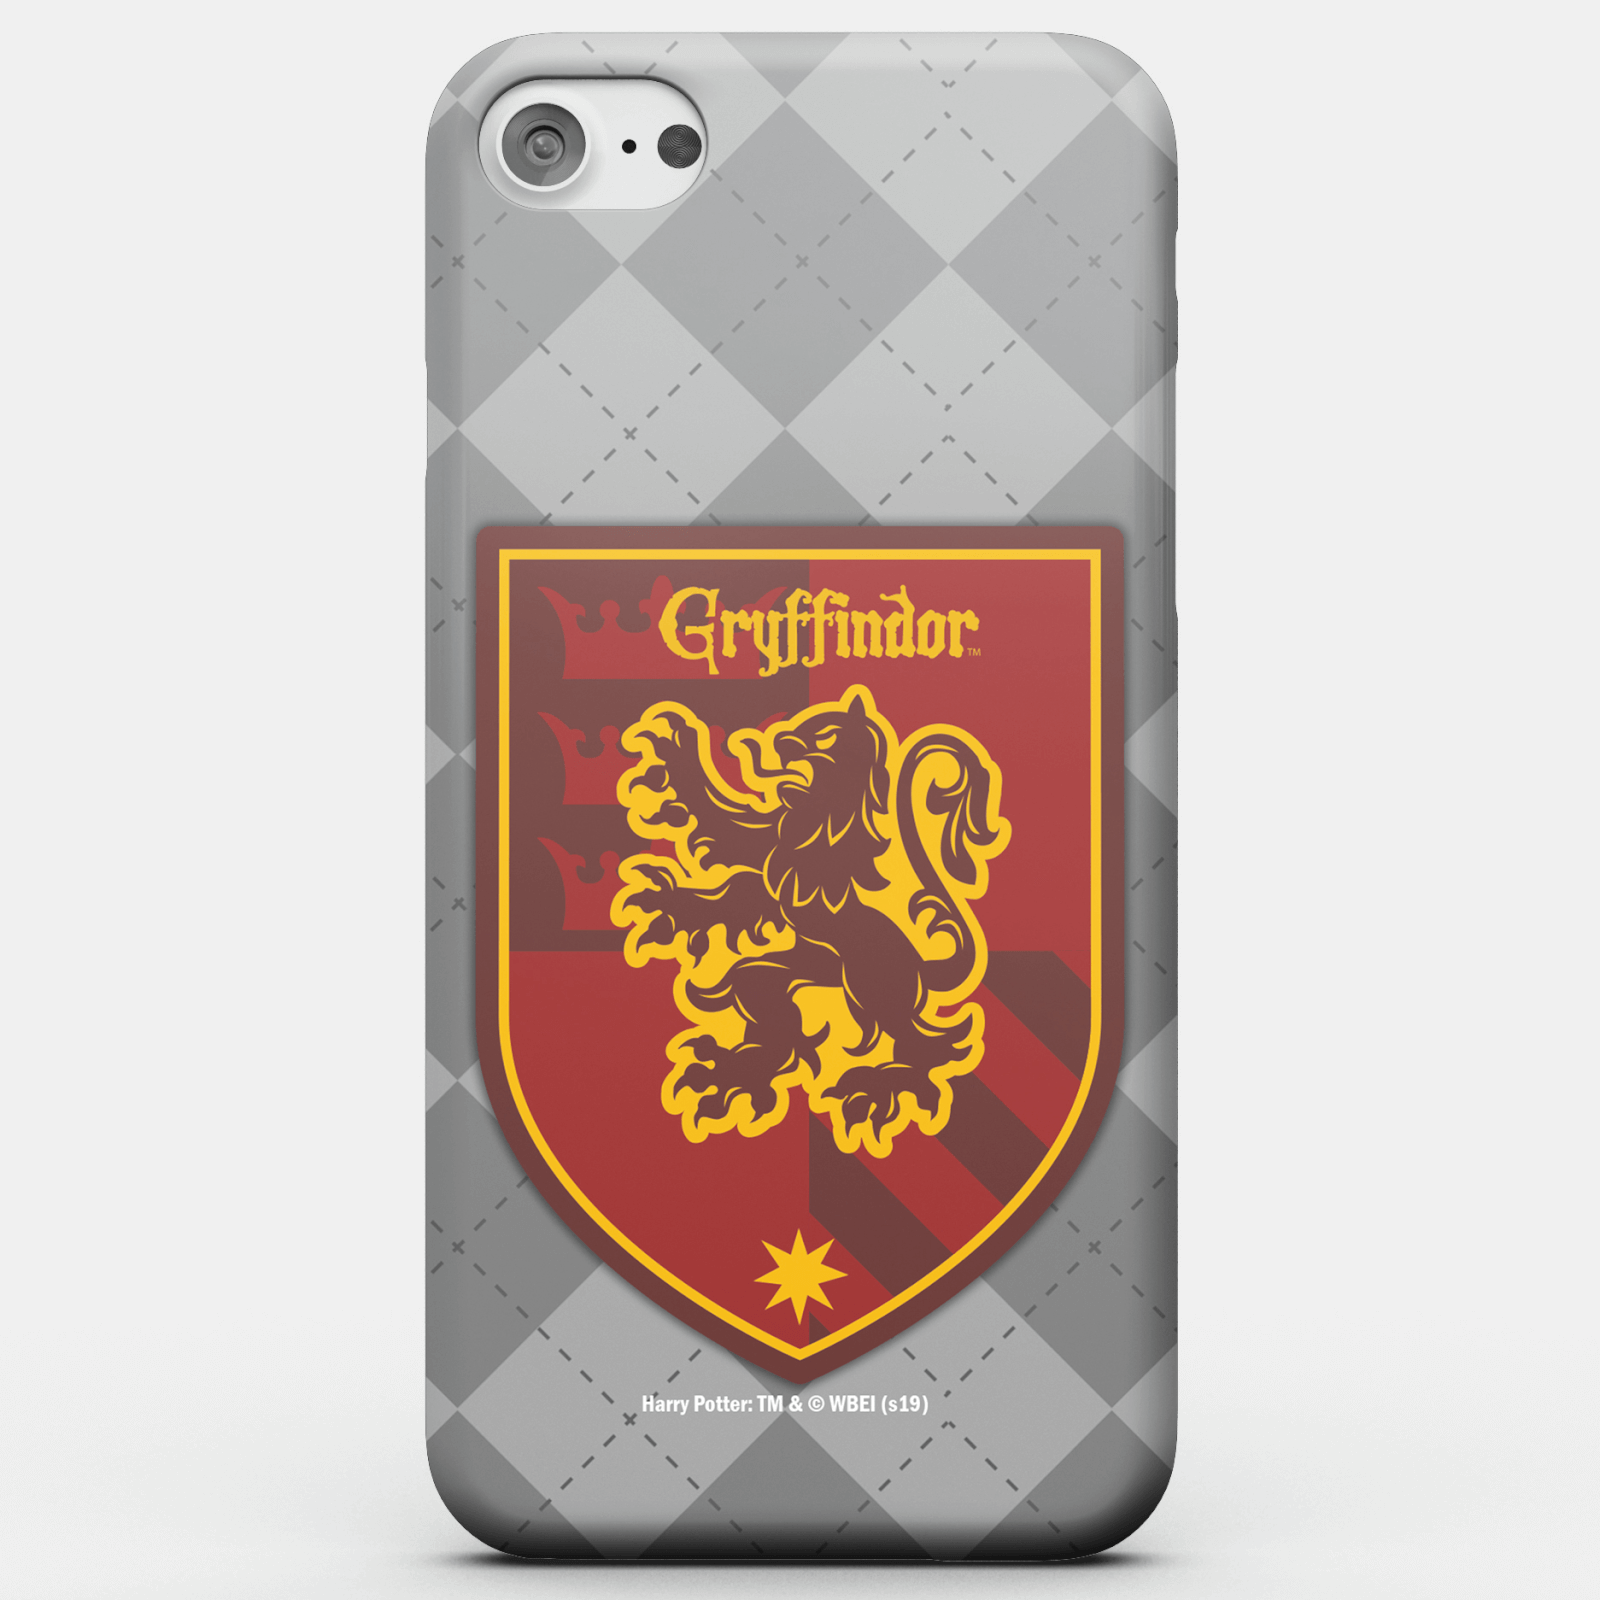 Harry Potter Phonecases Gryffindor Crest Phone Case for iPhone and Android - Samsung S8 - Snap Case - Gloss